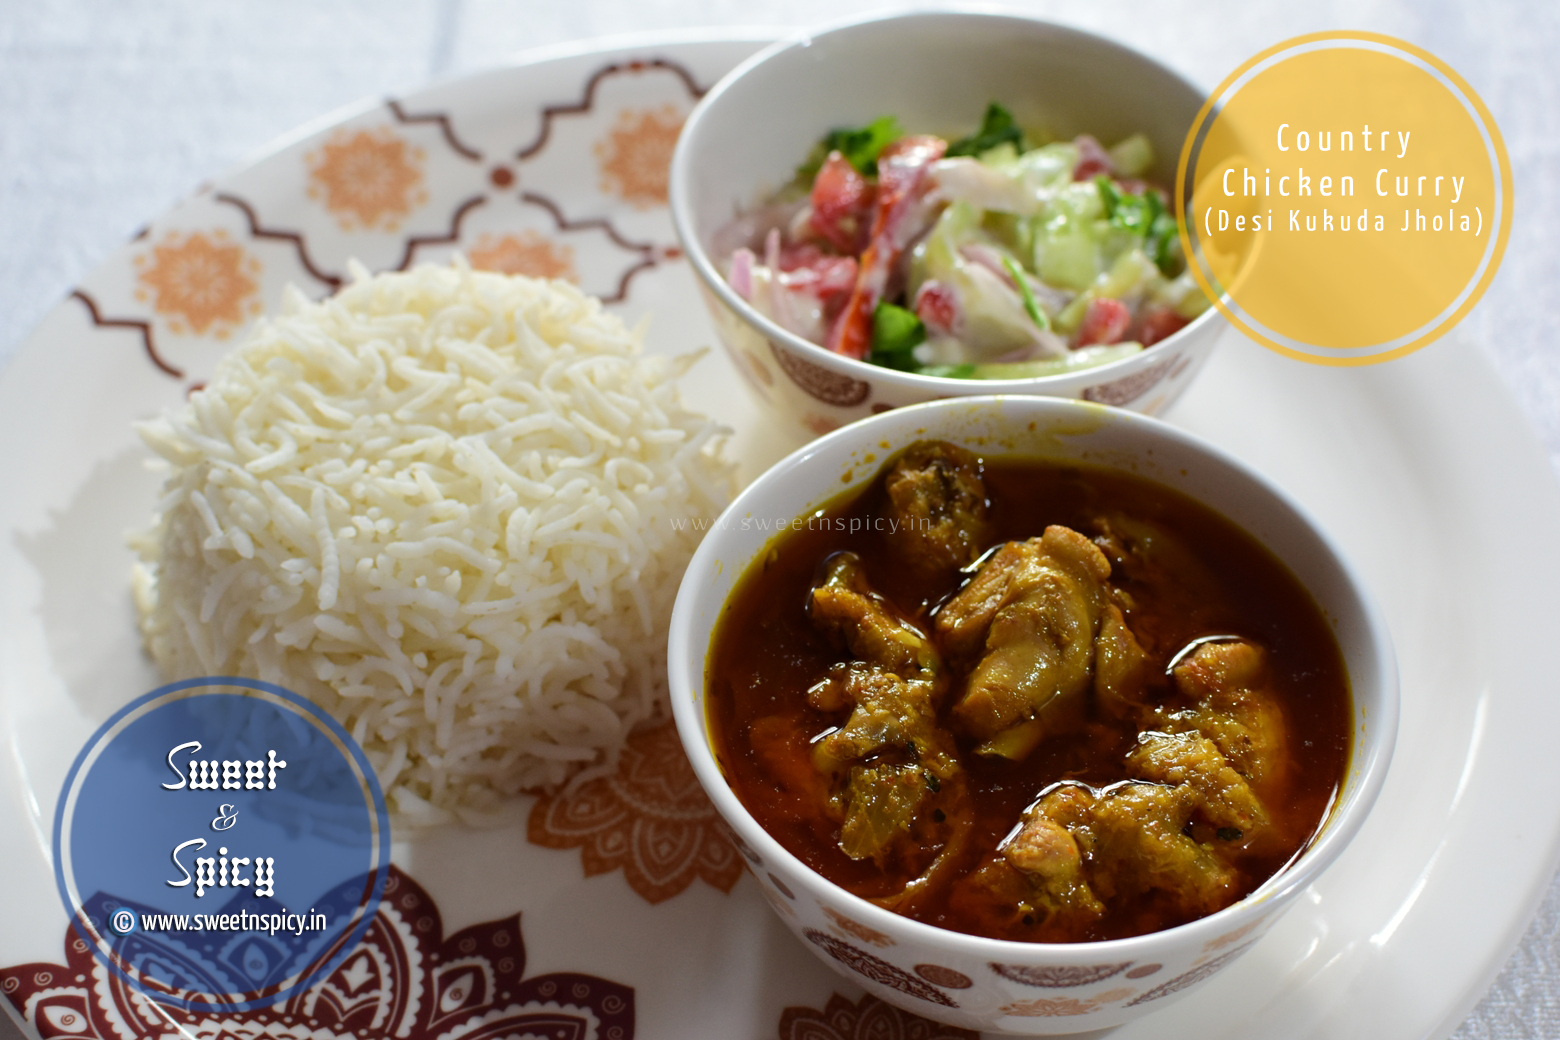 Country Chicken Curry with Steamed Rice and Cucumber-Yogurt Salad